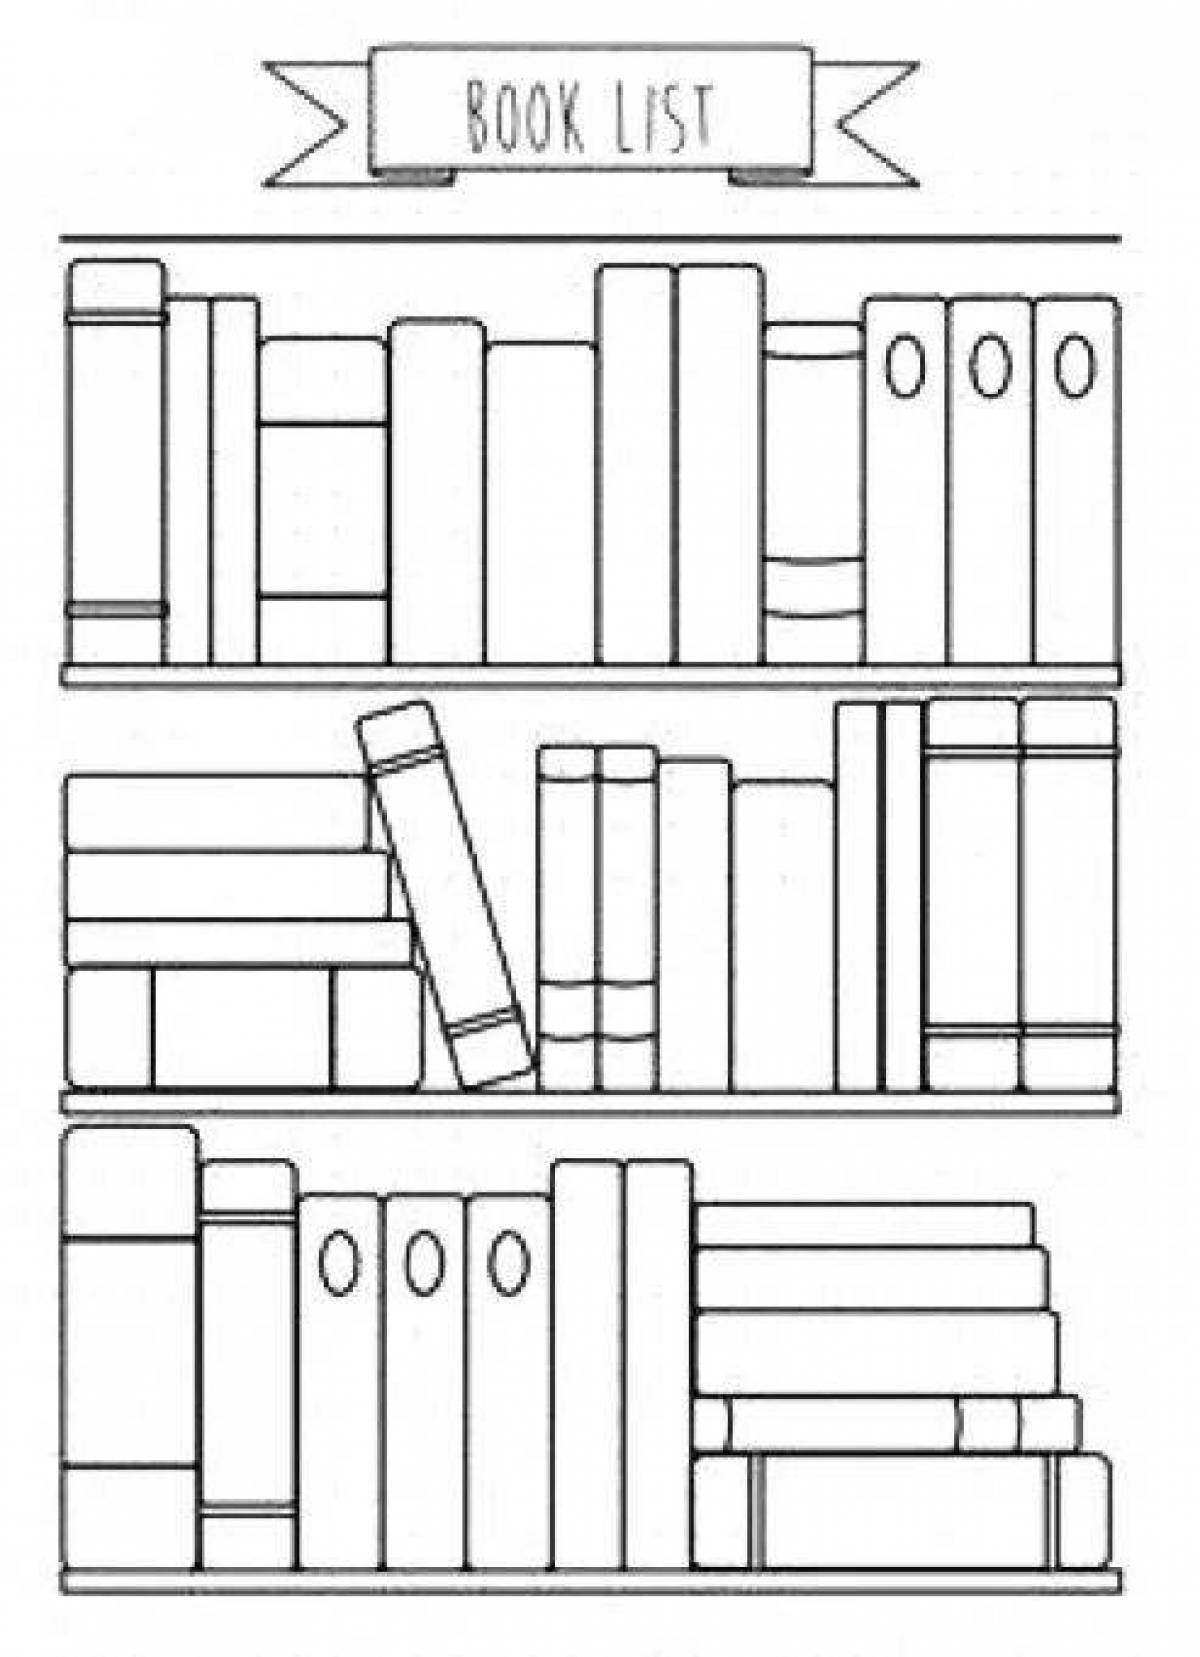 Coloring book home shelf with books